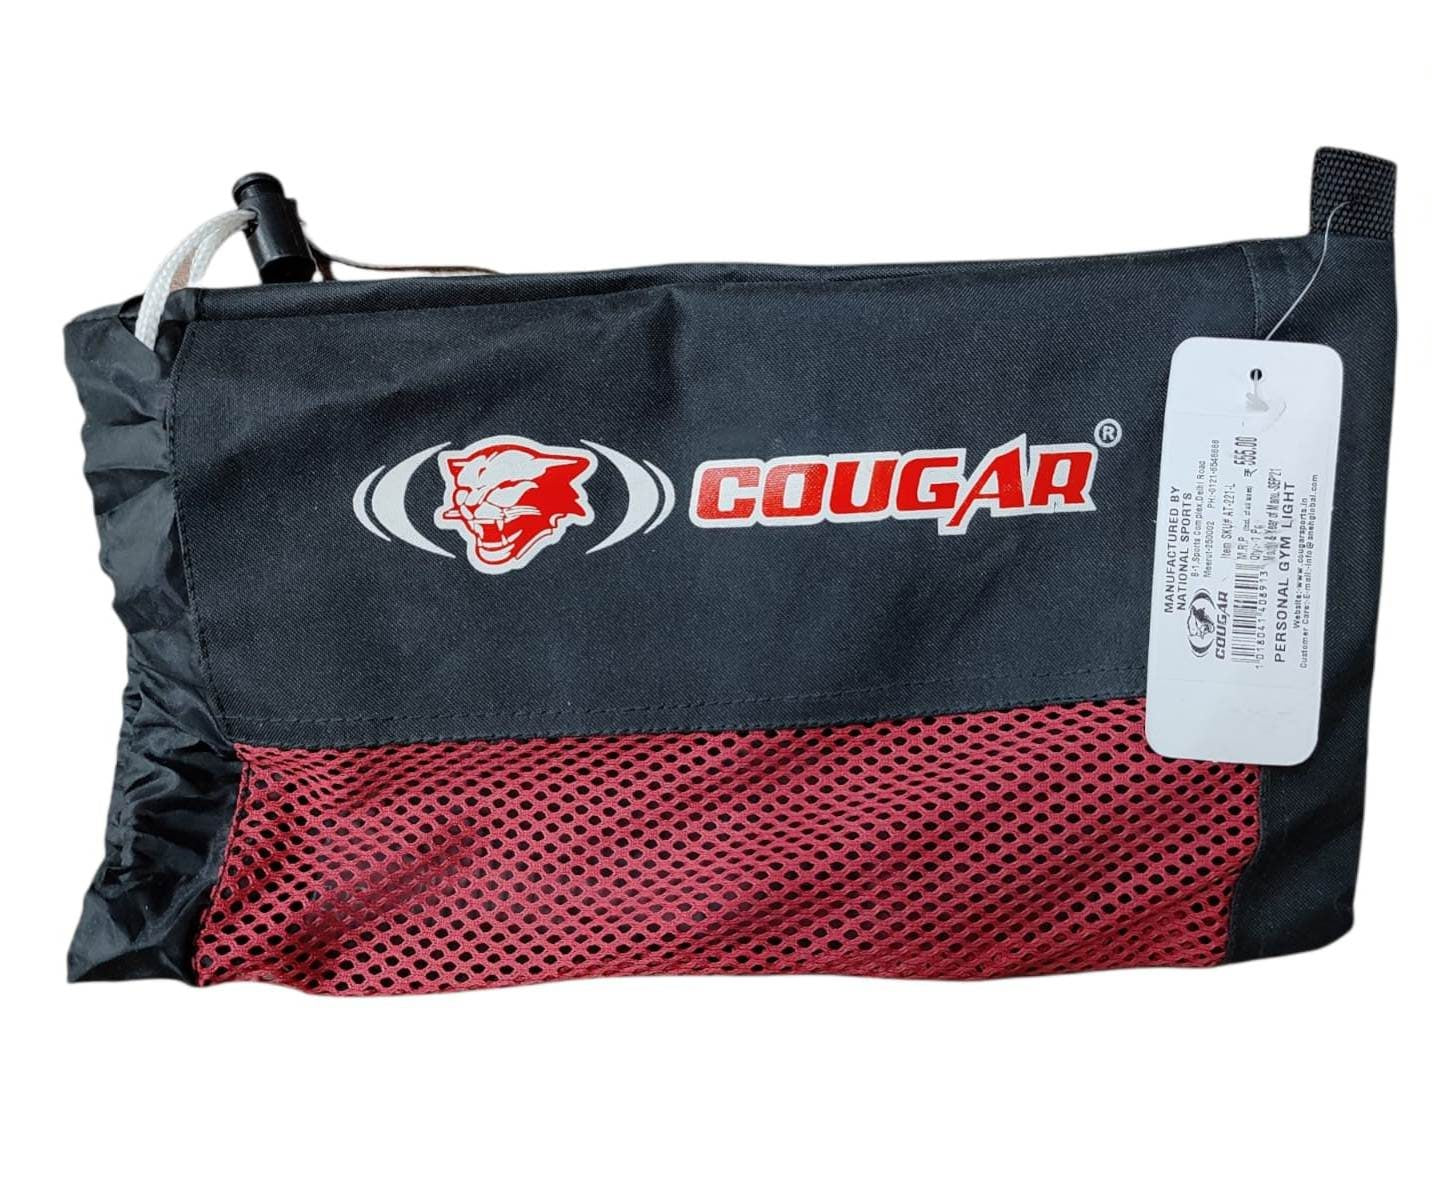 Cougar Tube (Exercise Tube) Personal GYM with Velcro Support